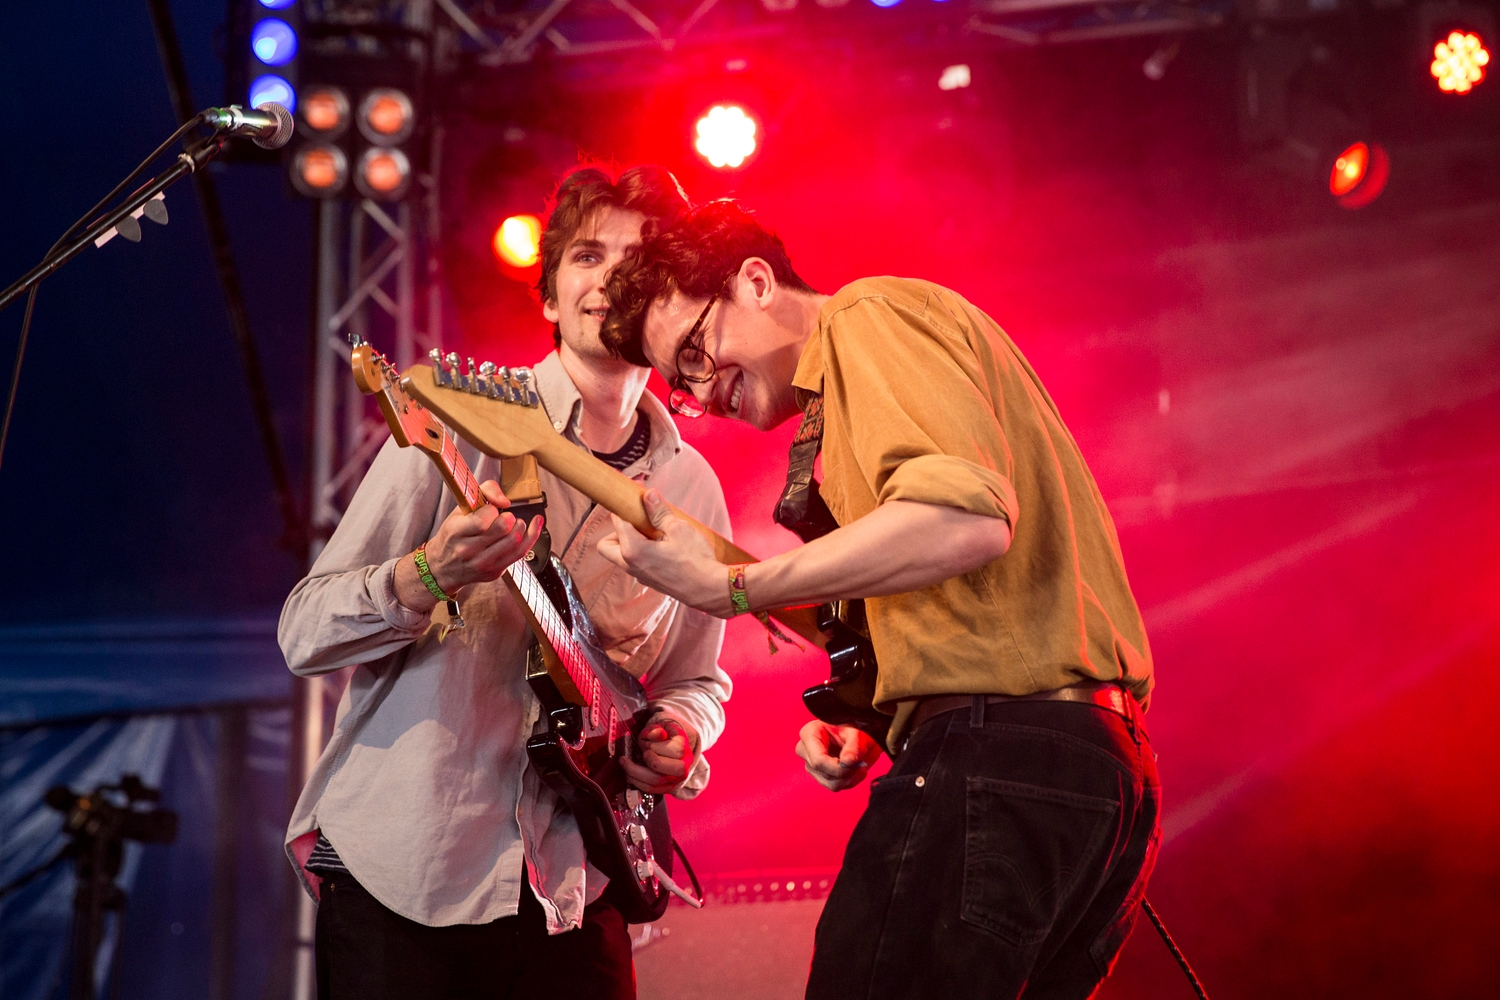 The Magic Gang go above and beyond at Reading 2016